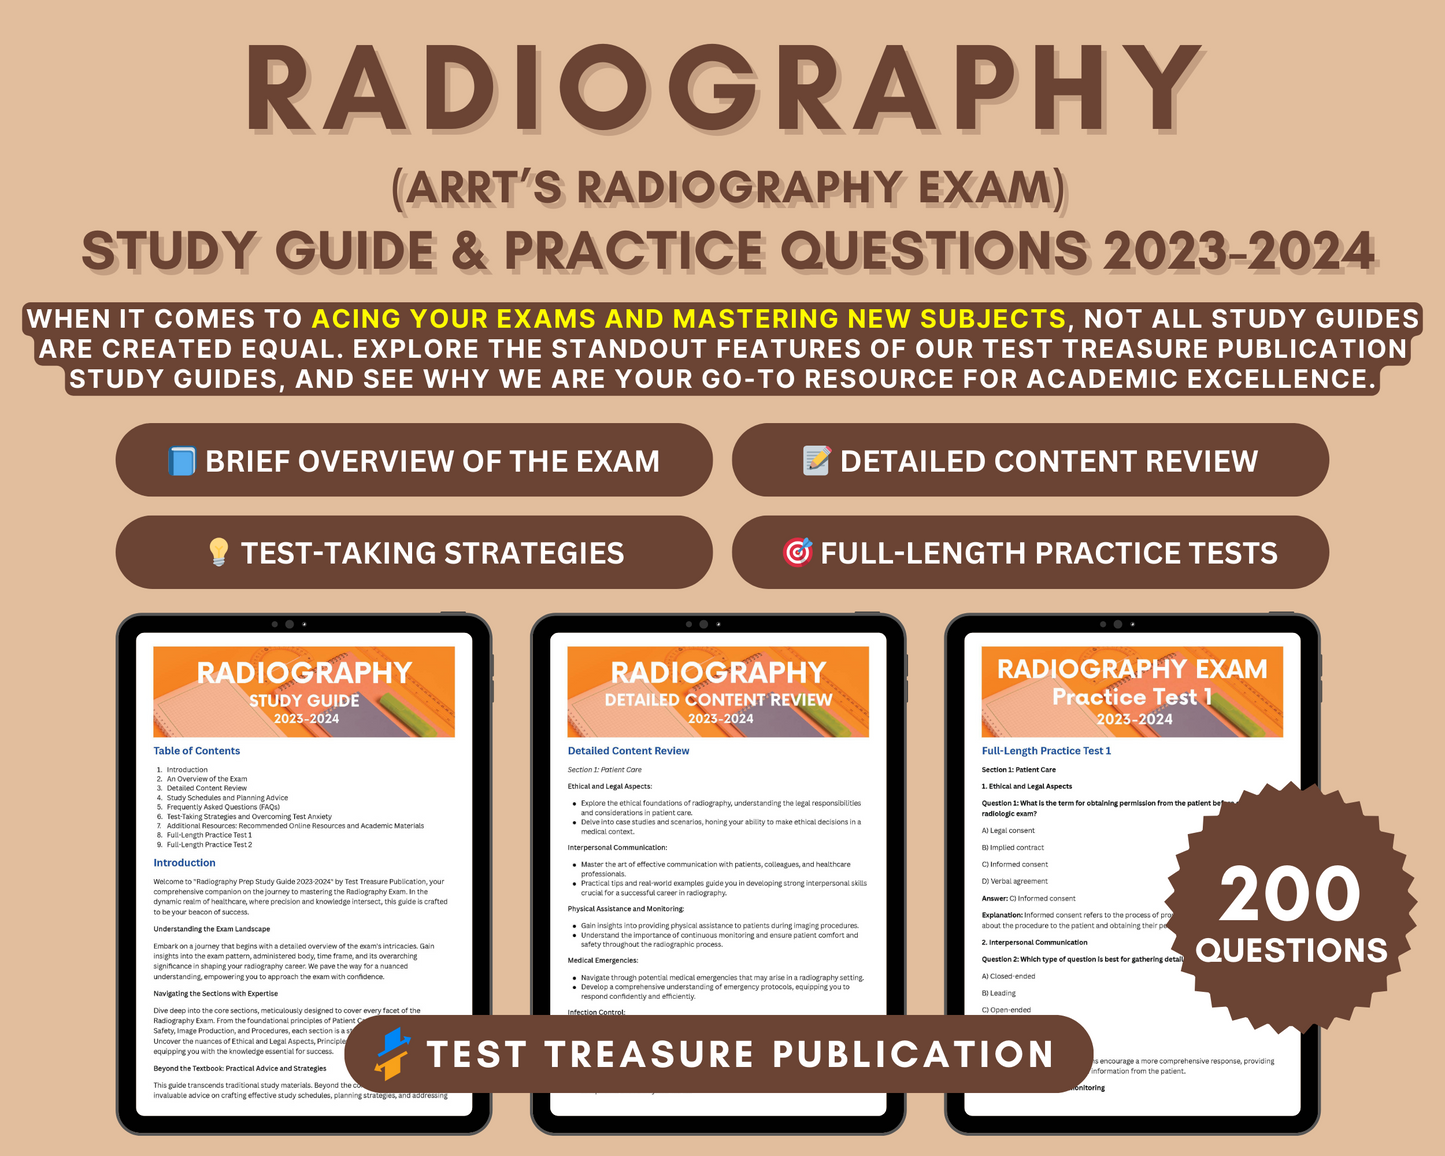 Radiography Prep Study Guide 2023-2024: In-Depth Content Review, Practice Tests & Exam Tips for Aspiring Radiographers!